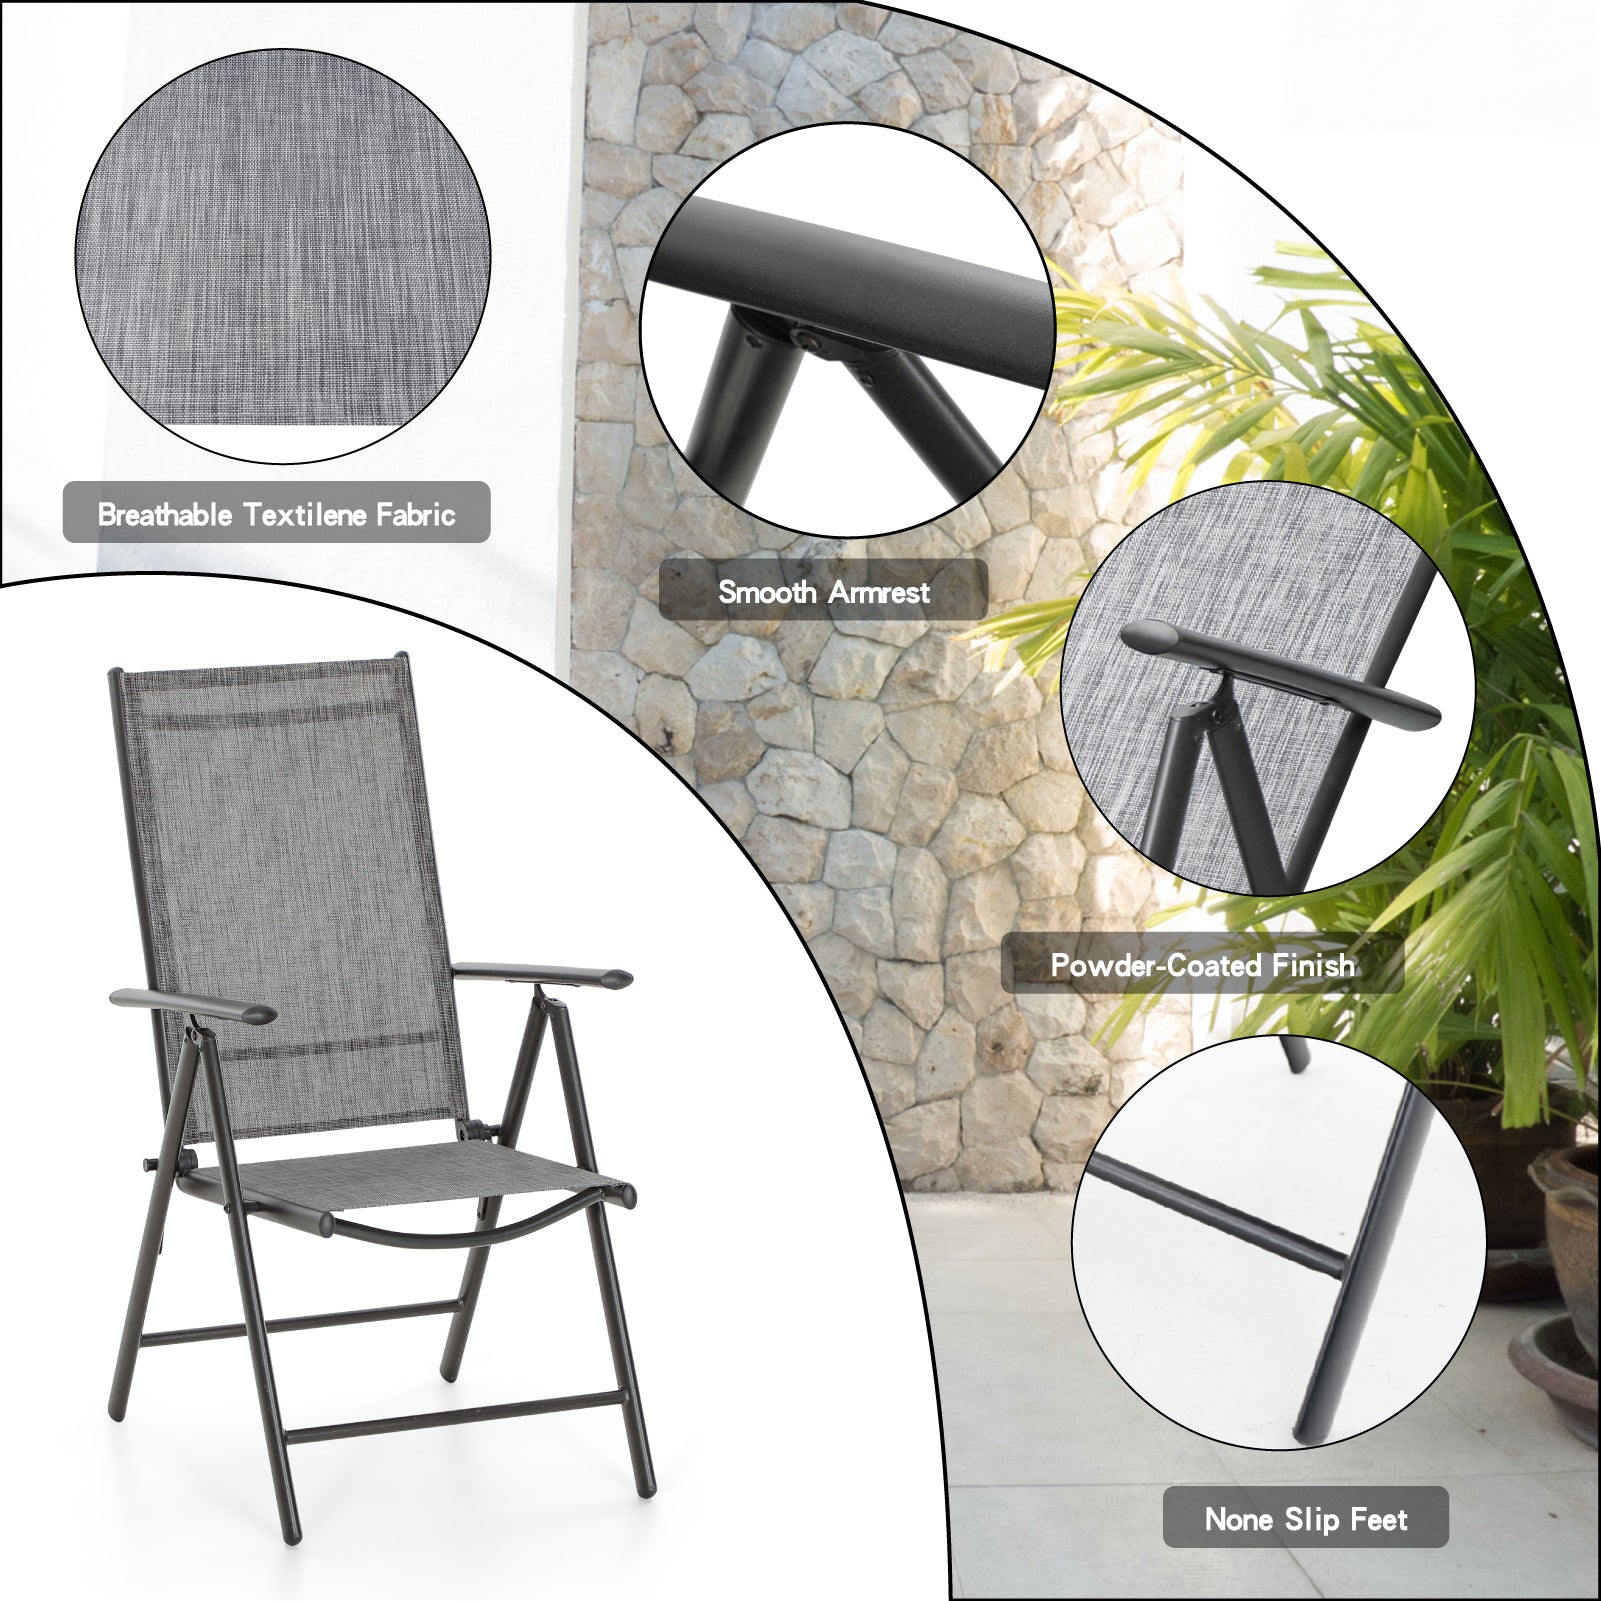 Sophia & William 5-Piece Square Steel Table & Textilene Reclining Folding Sling Chair Patio Dining Sets